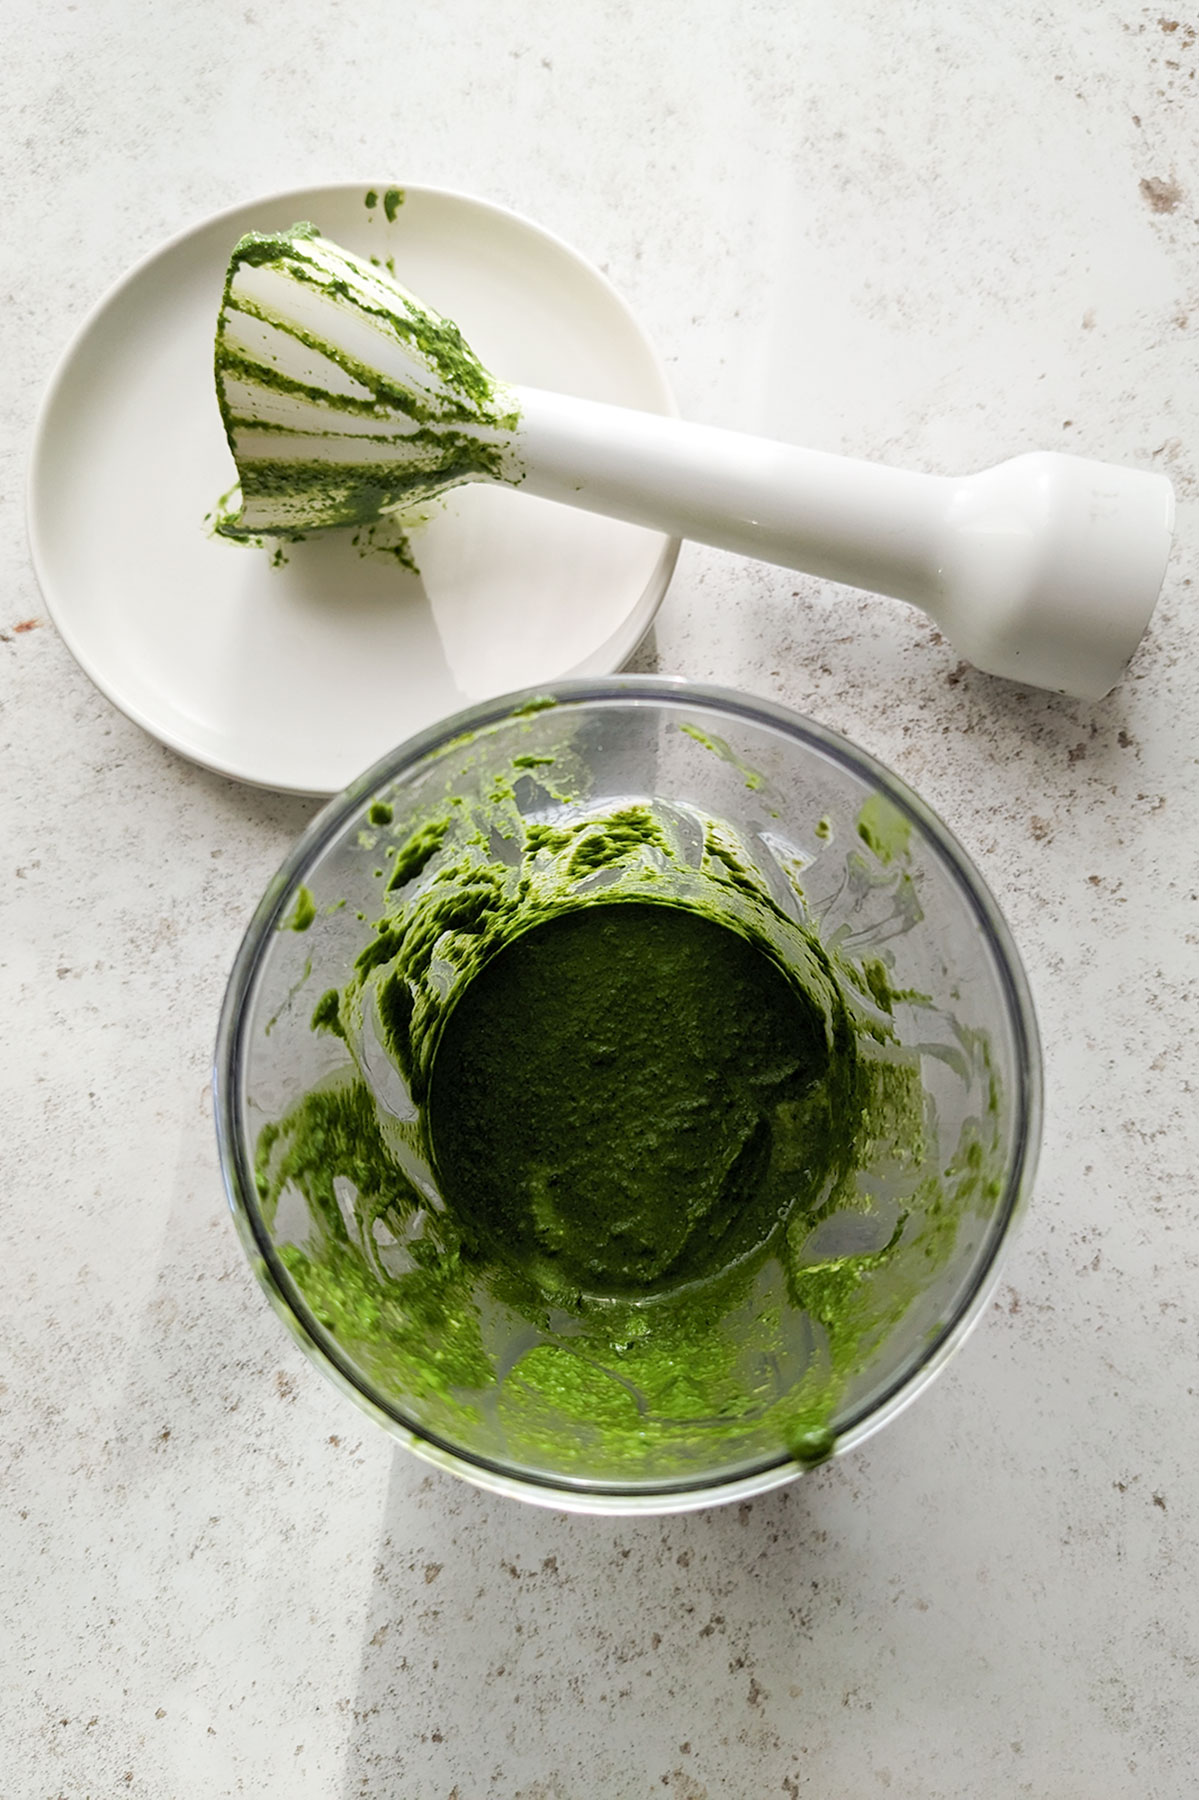 Blitzing the spinach, basil, Parmesan, cream and lemon in a glass bowl until smooth.